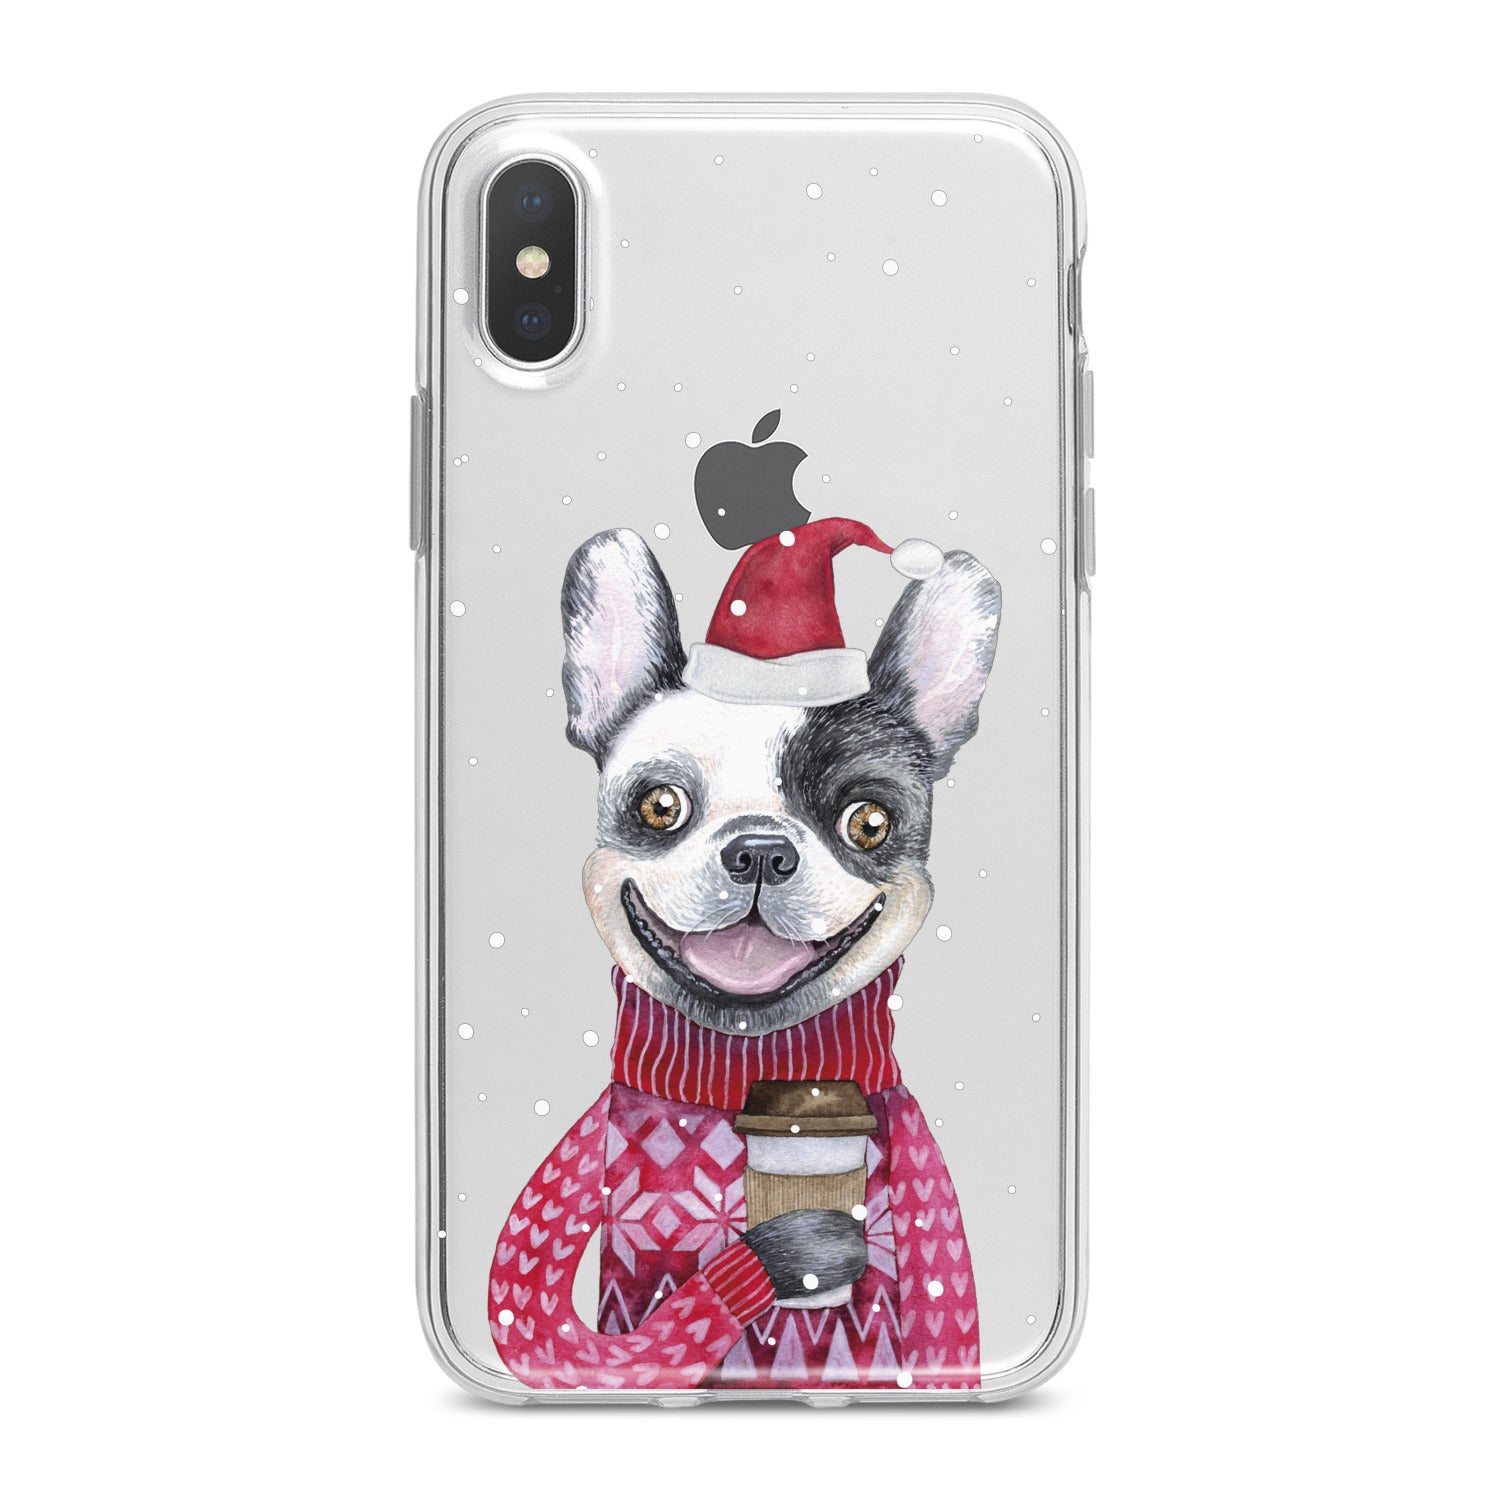 Lex Altern Happy Dog Santa Phone Case for your iPhone & Android phone.